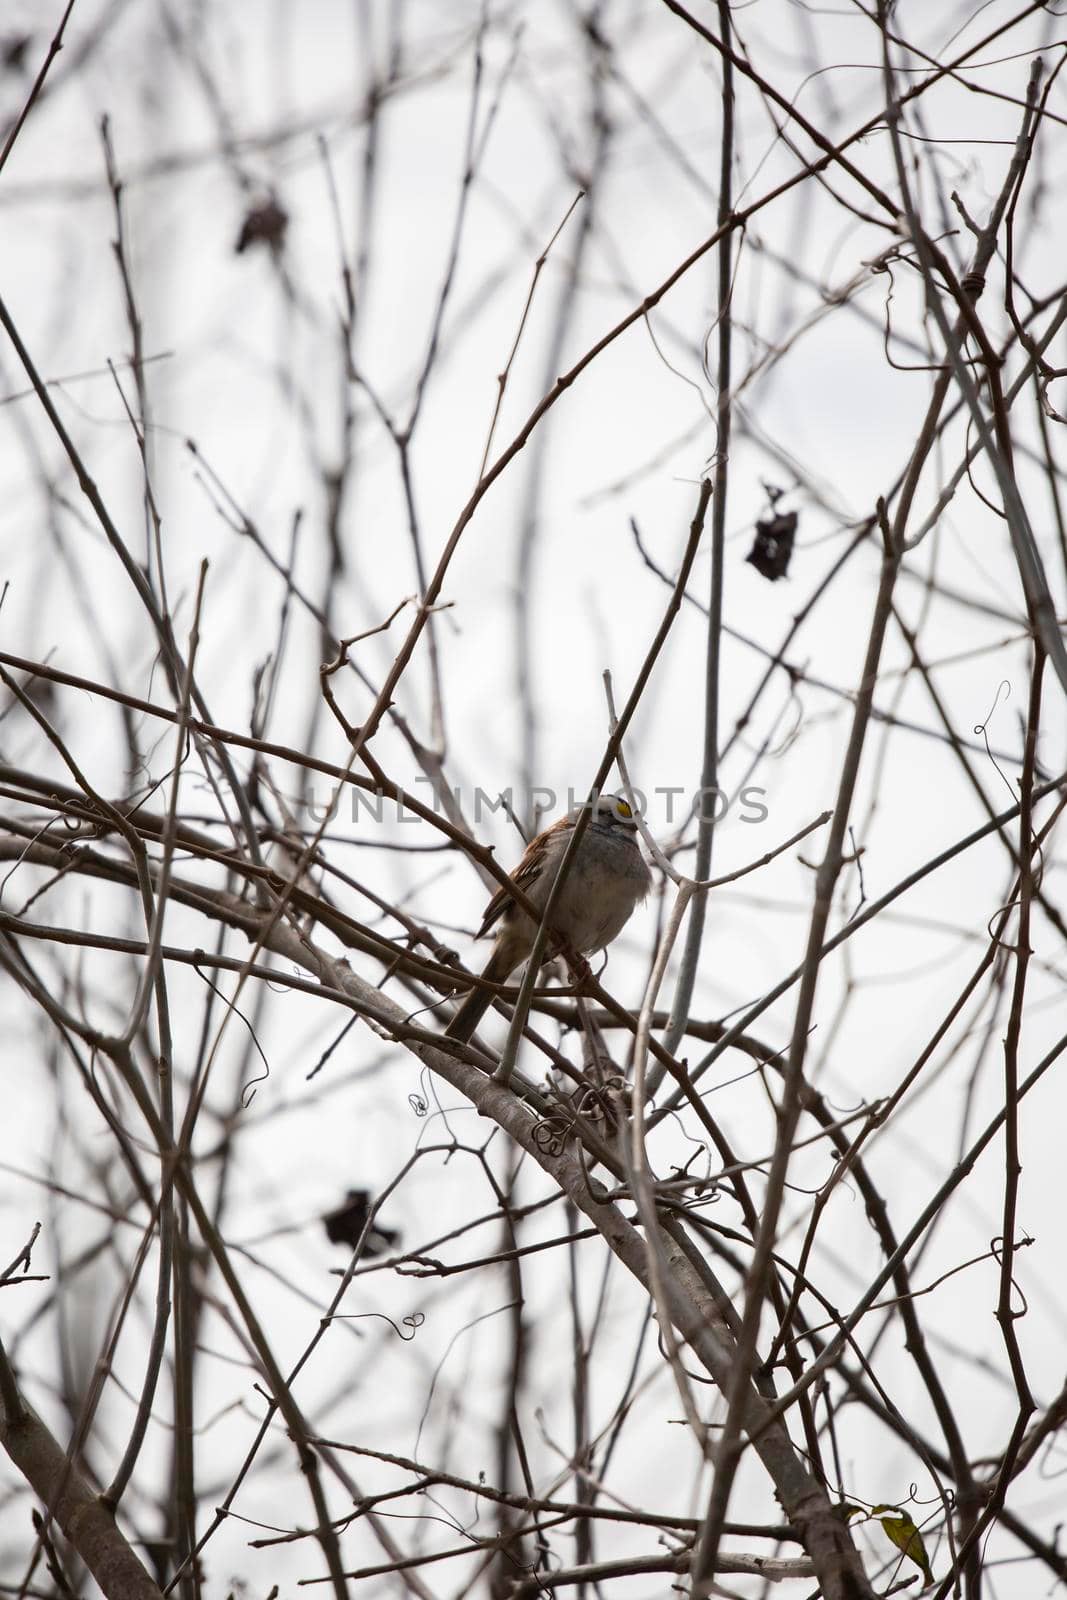 Curious white-throated sparrow (Zonotrichia albicollis) perched on bare limbs on an overcast, cold day